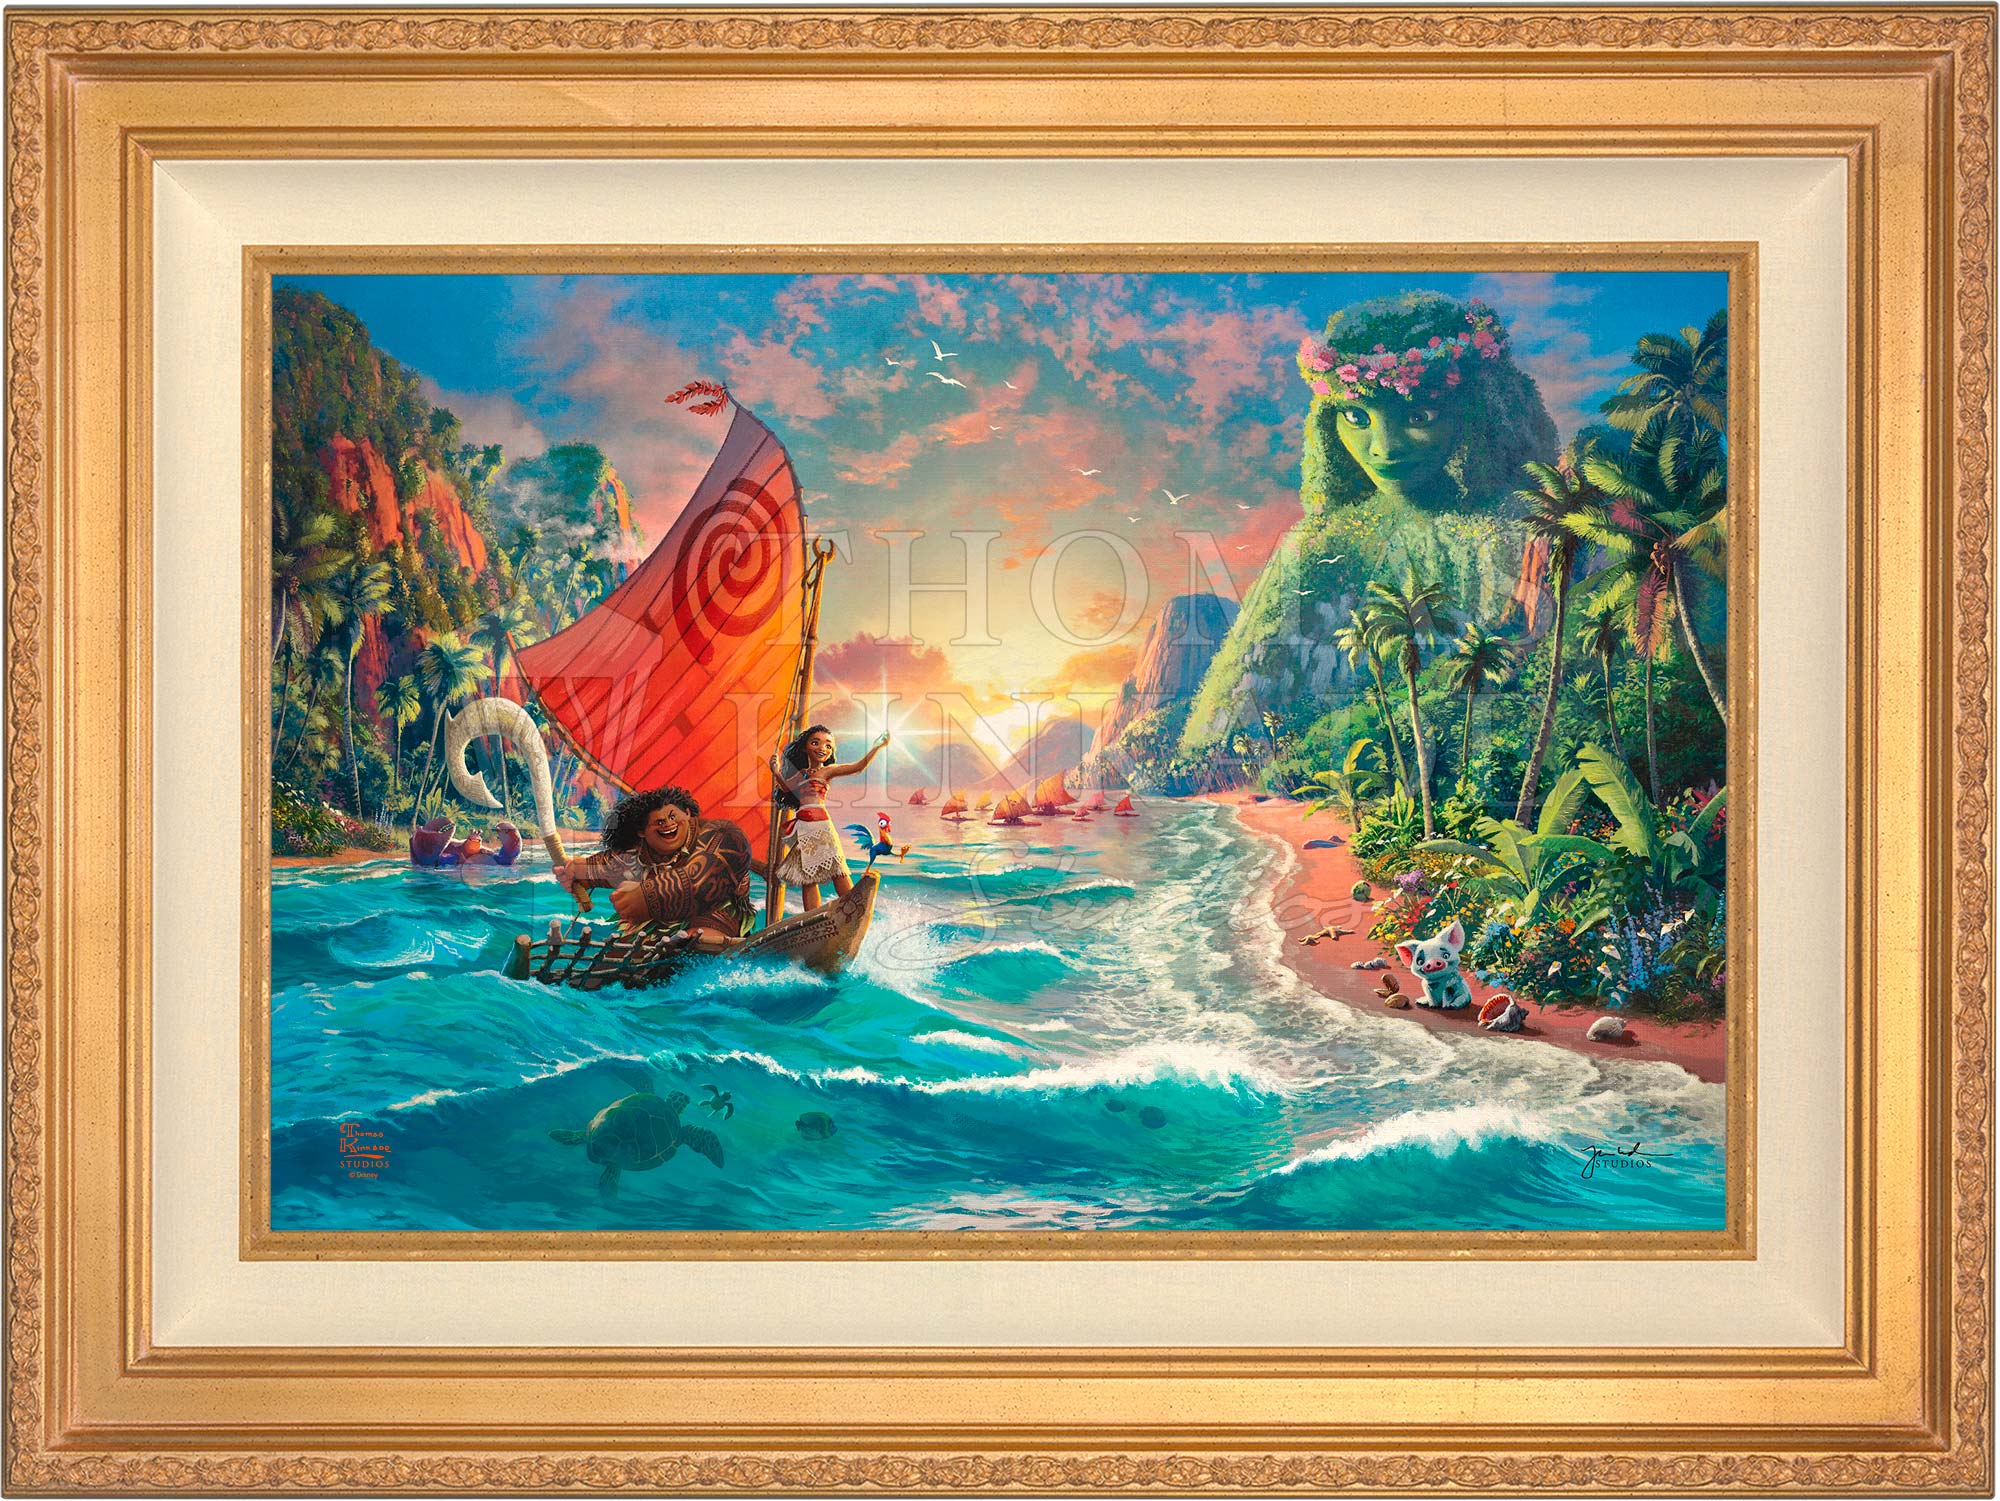 The legend told that Maui must restore the goddess’ heart, but as she realizes her potential and fulfills her destiny, it is a strong and inspiring Moana, with the aid of Maui, who restores Te Fiti’s heart and the island’s balance.  Antique Gold Frame